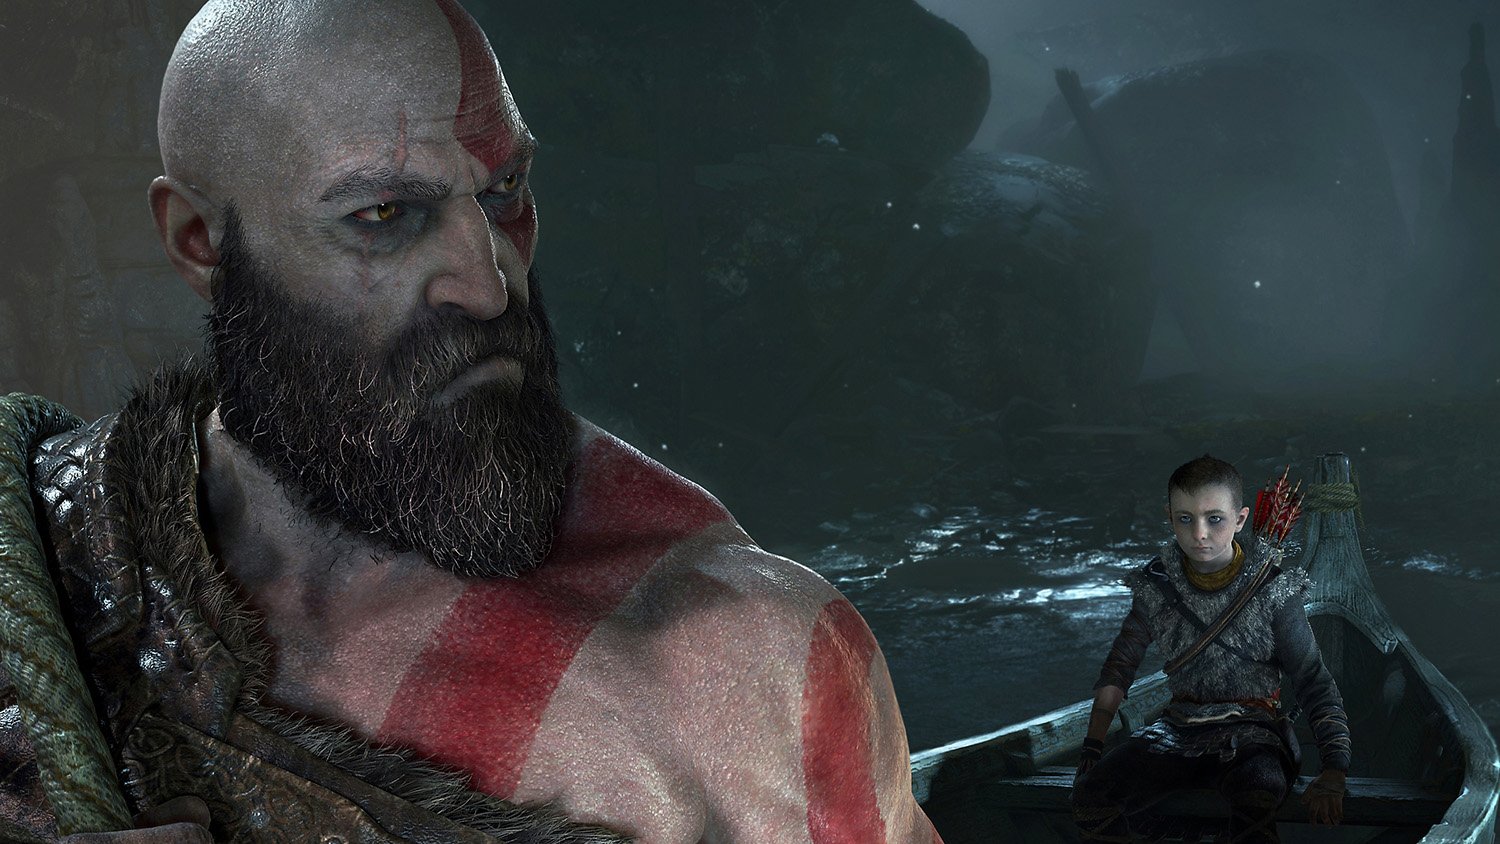 Kratos and Atreus in God of War, which is reportedly getting a TV series